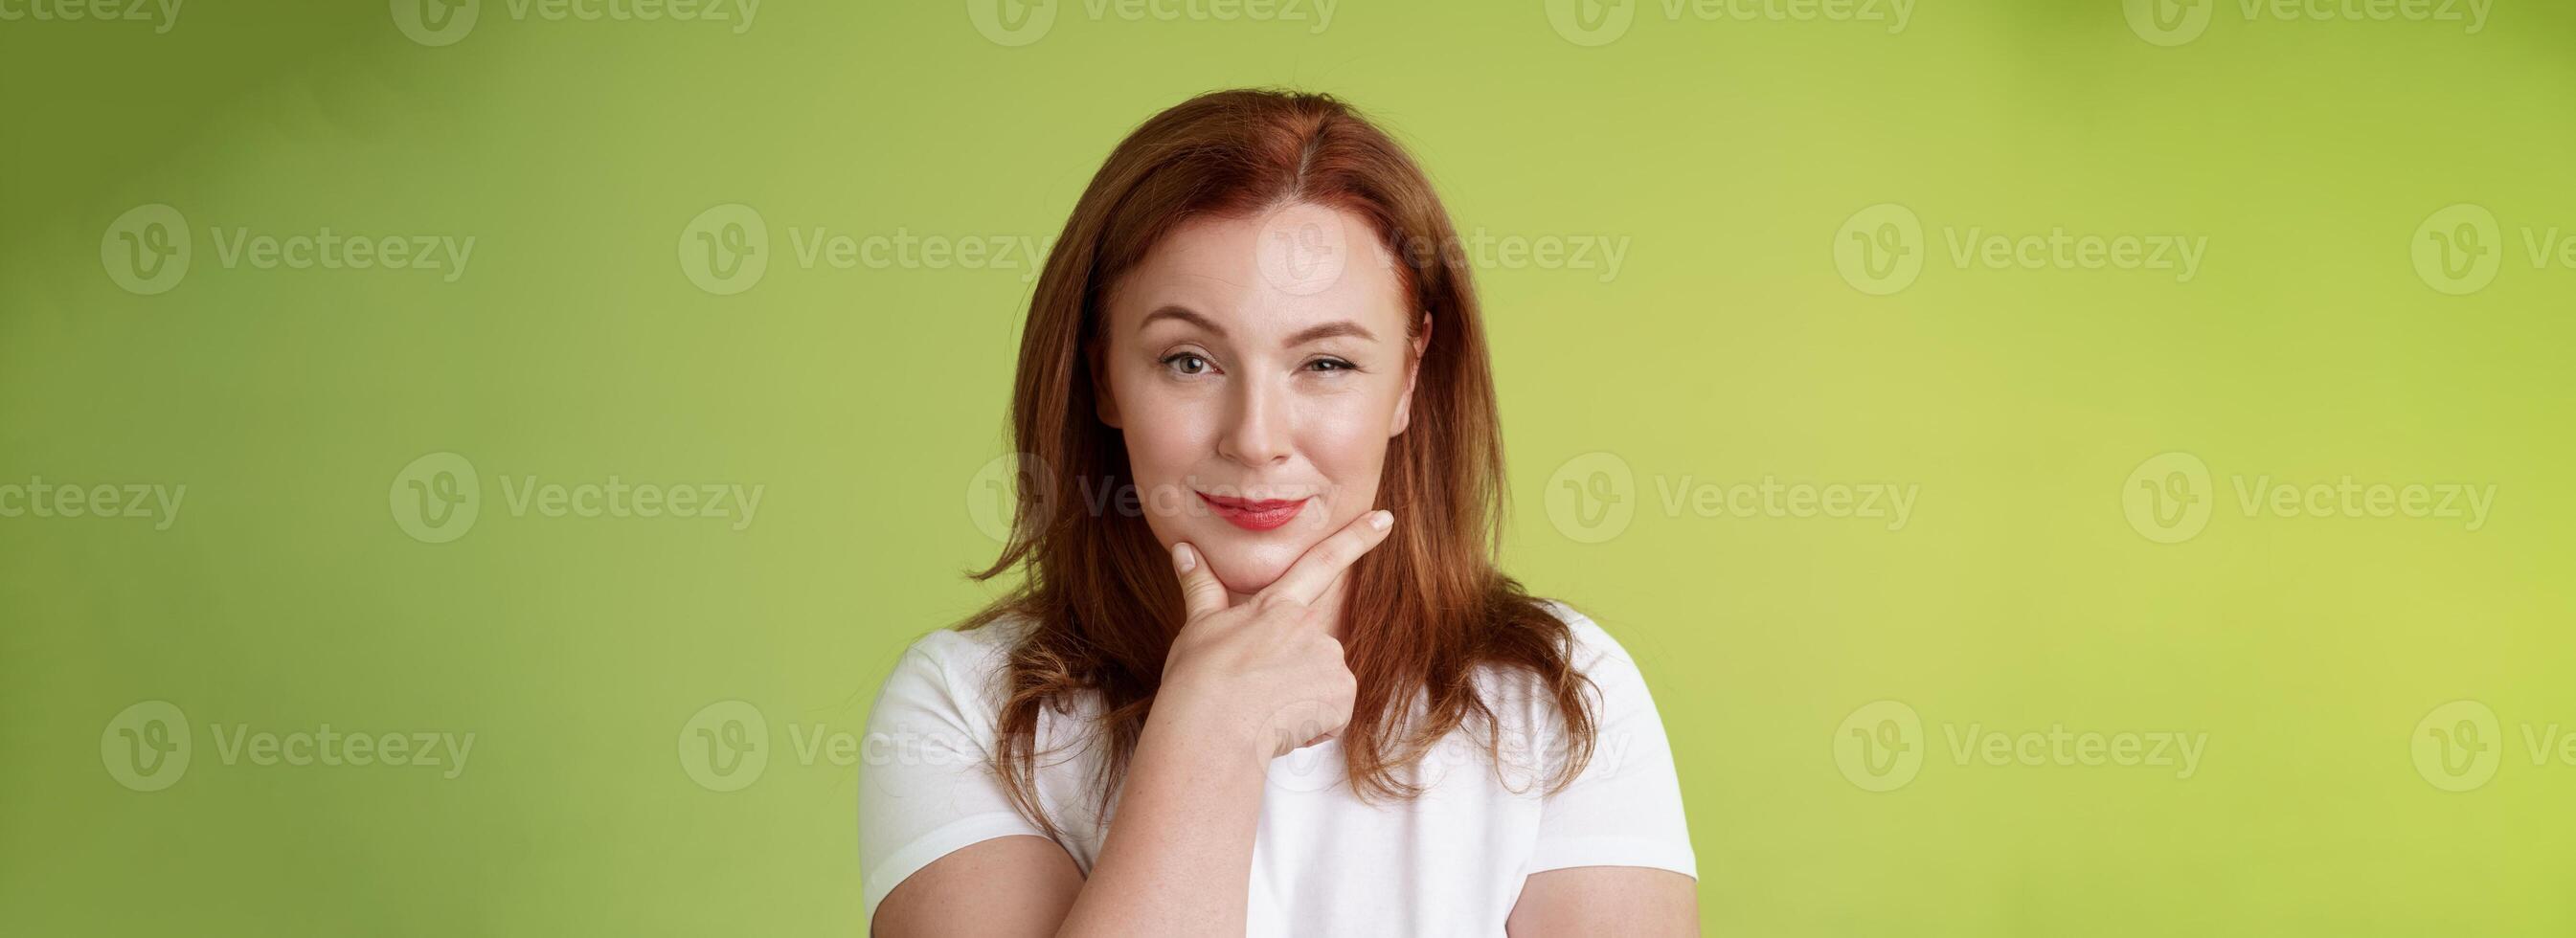 Hmm interesting choice. Intrigued cunning redhead middle-aged female hold hand face-line rub chin thoughtful smirking pleased raise eyebrow curious pondering alluring decision green background photo